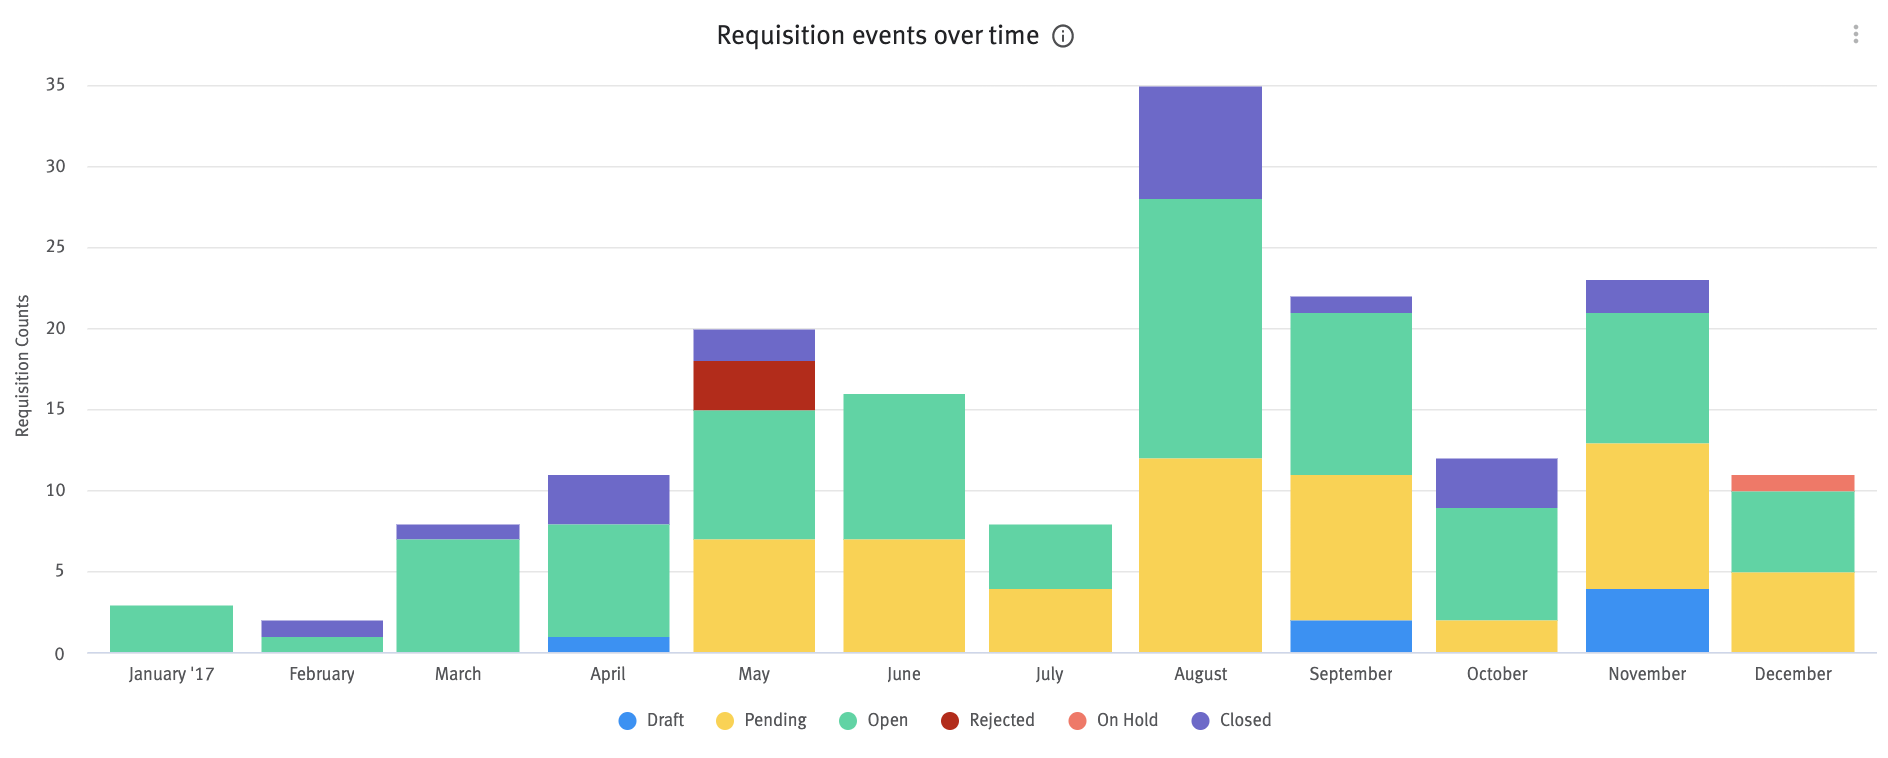 Requisitions events over time chart